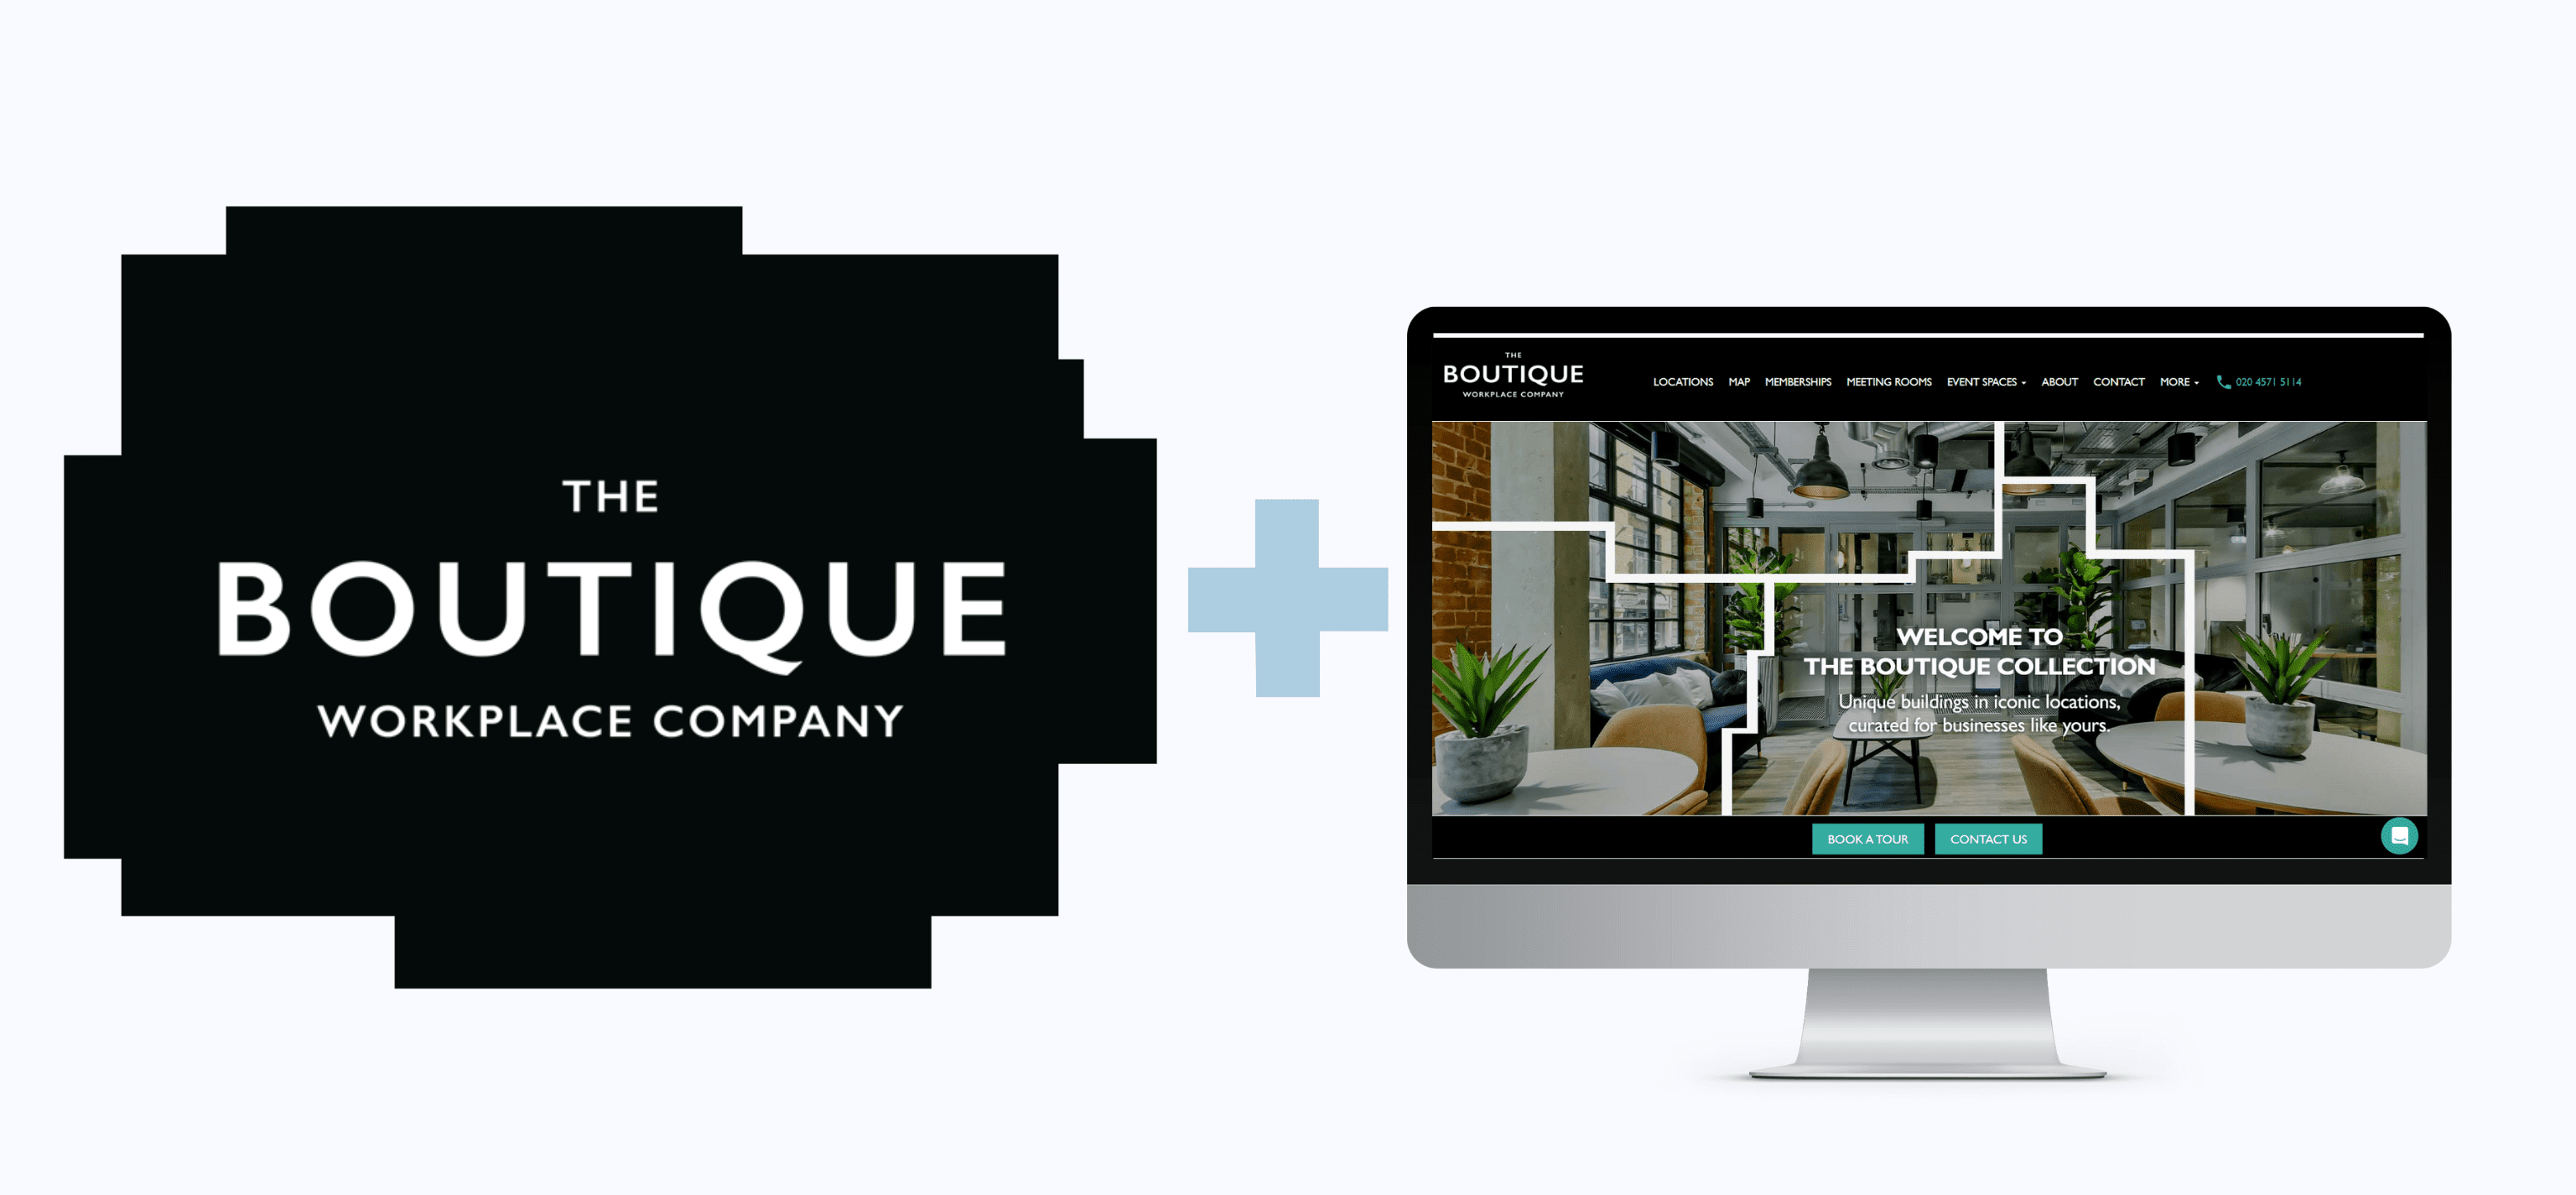 Building a better brand for The Boutique Workplace Company